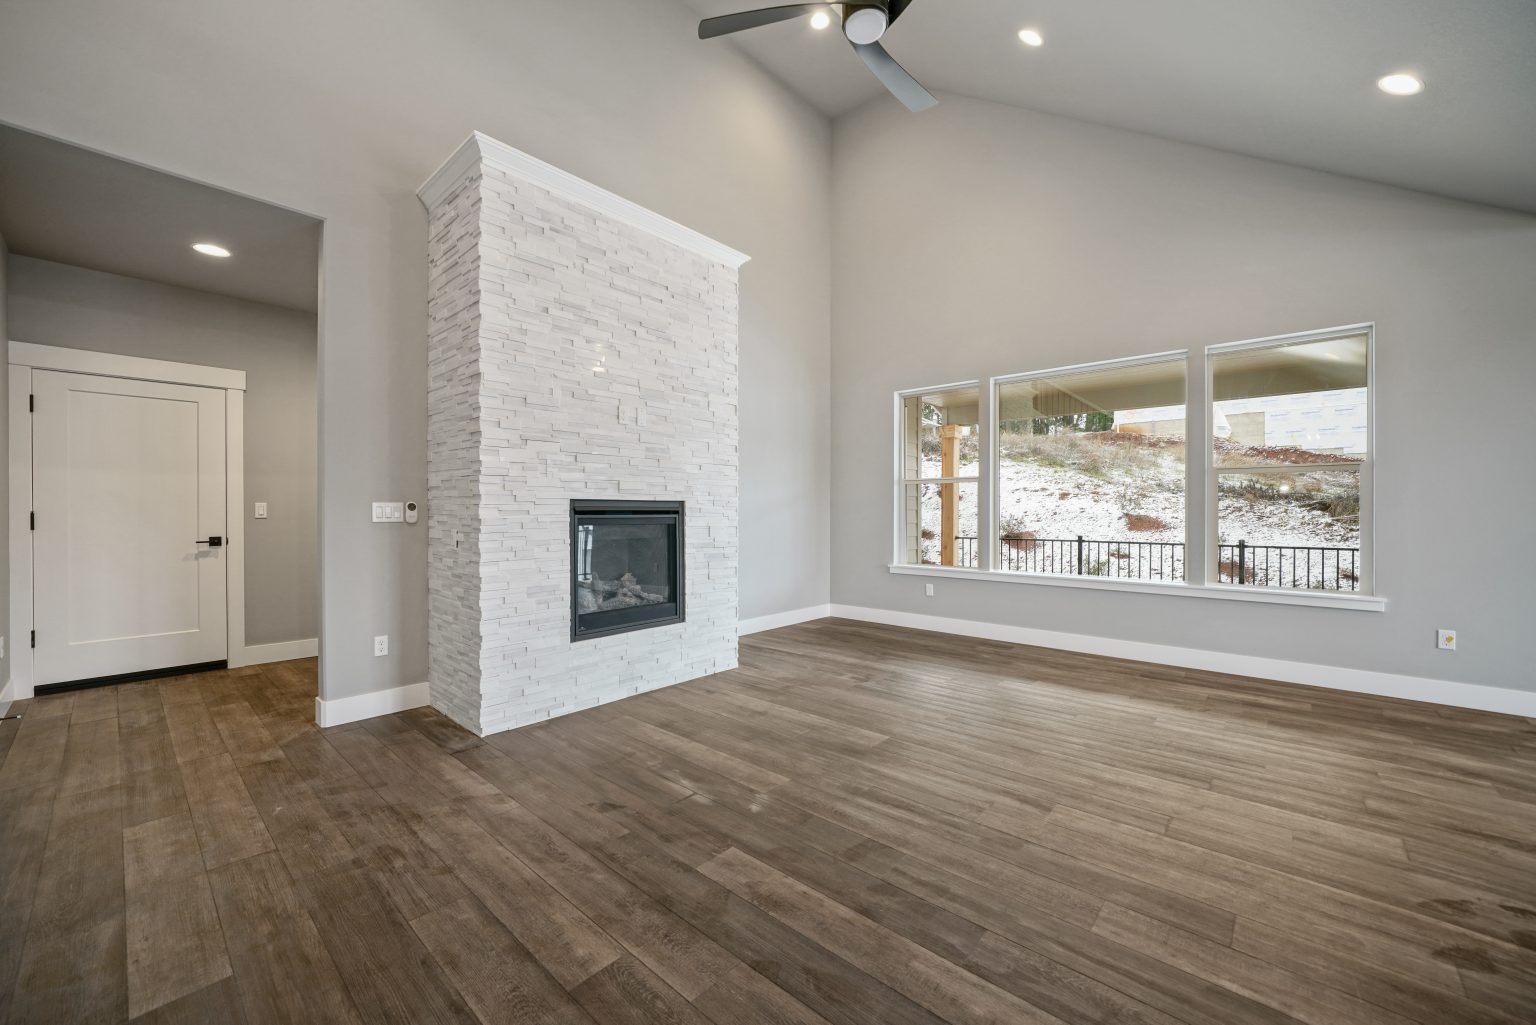 gorgeous living space with three large windows, high ceilings, white stone exposed wall with built-in gas fireplace and hardwood floors